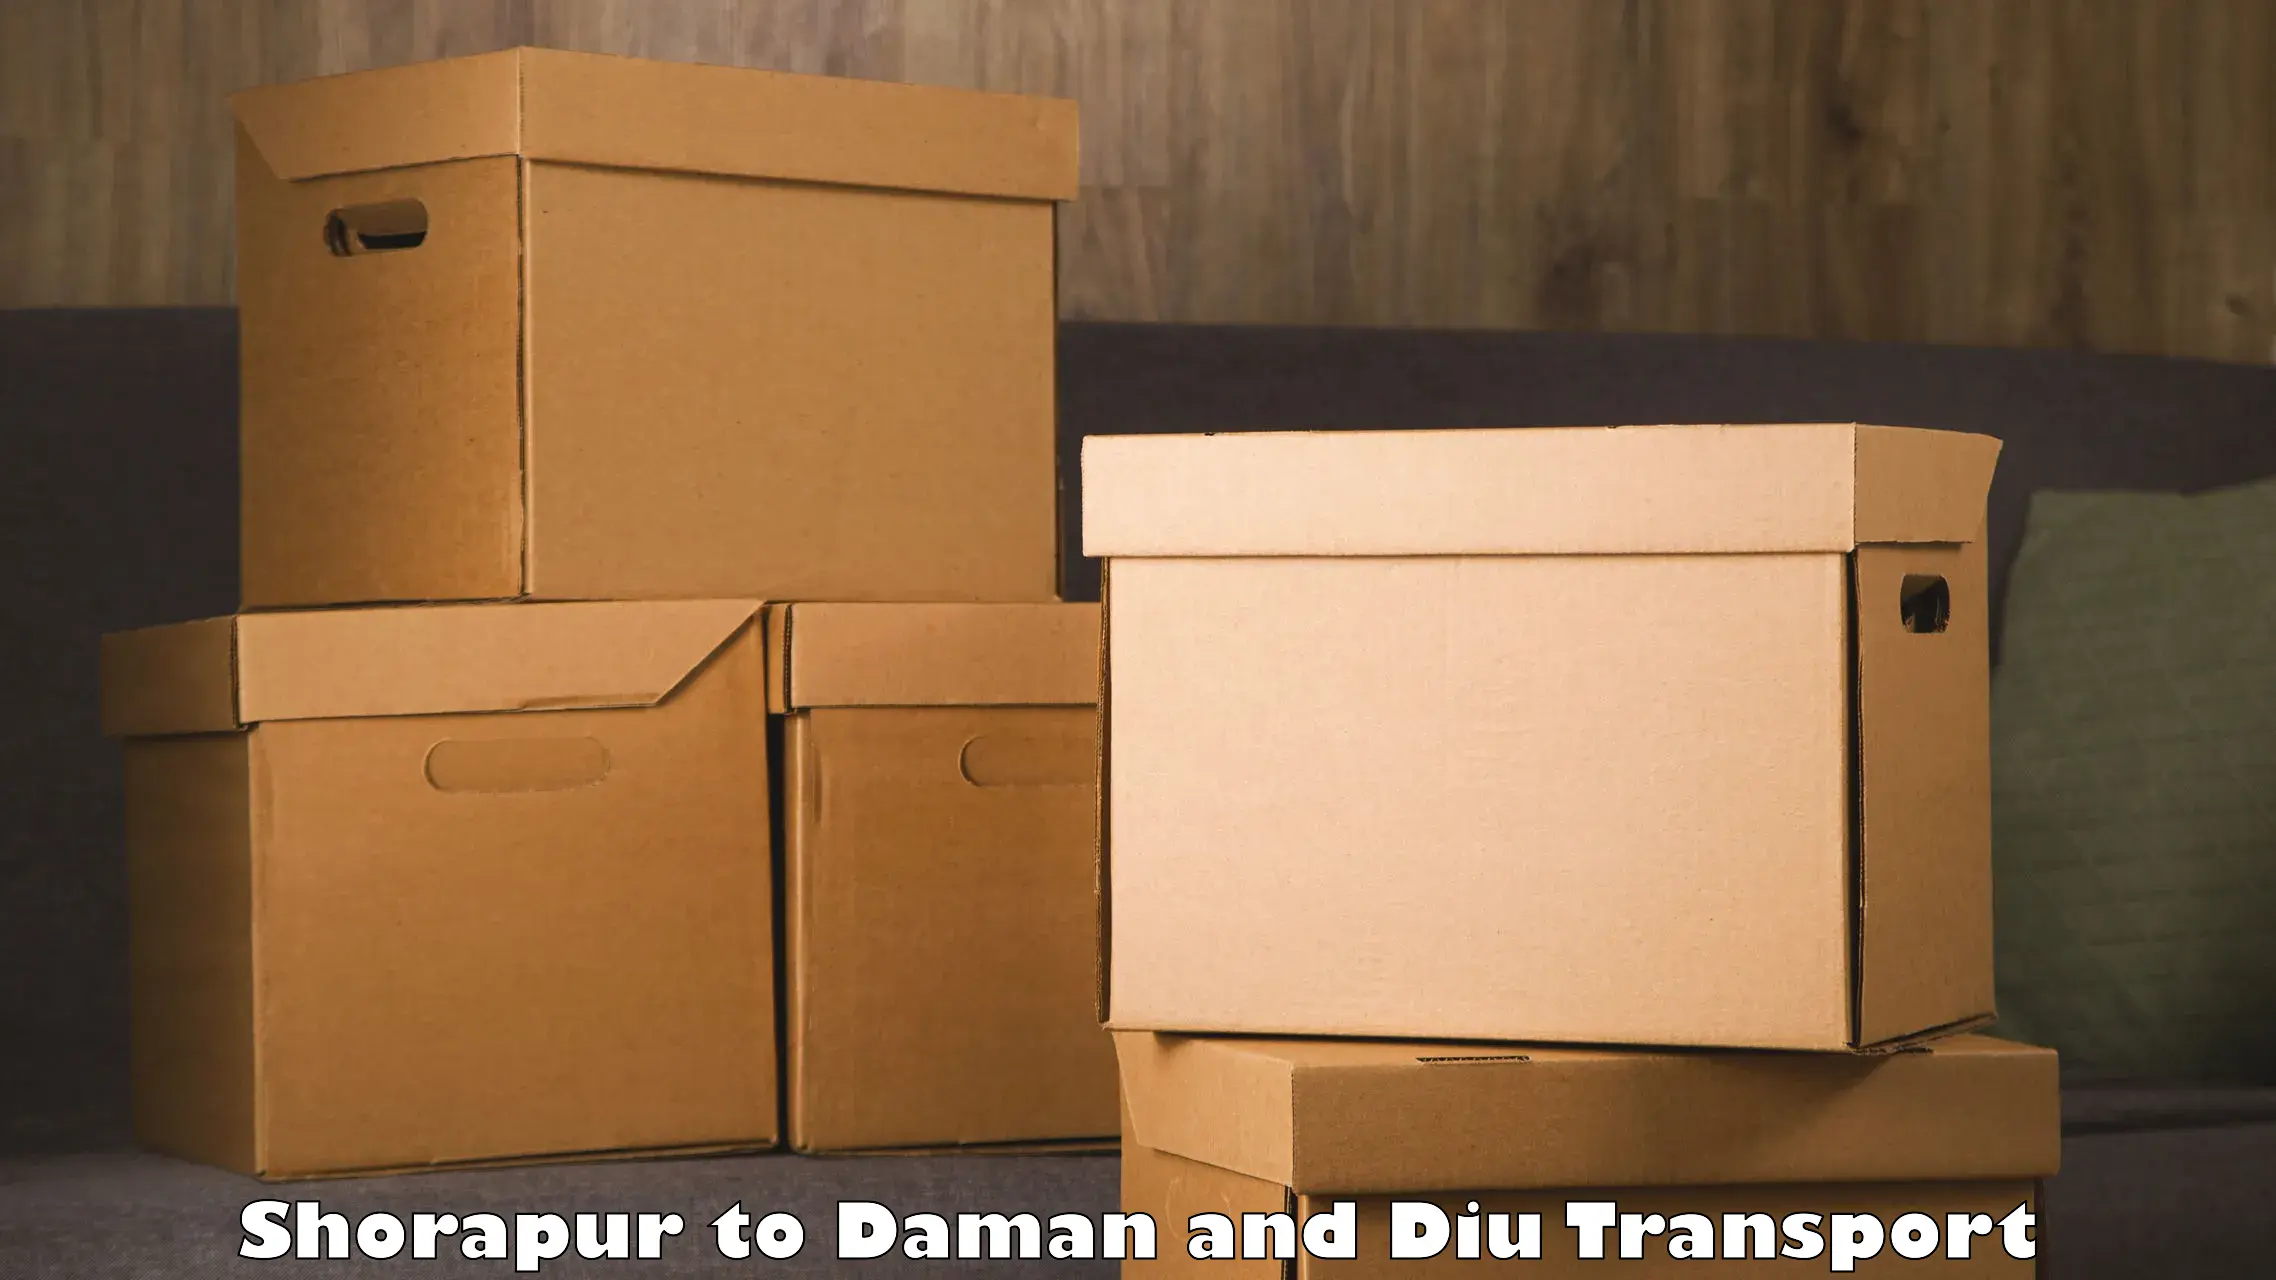 Vehicle parcel service in Shorapur to Diu